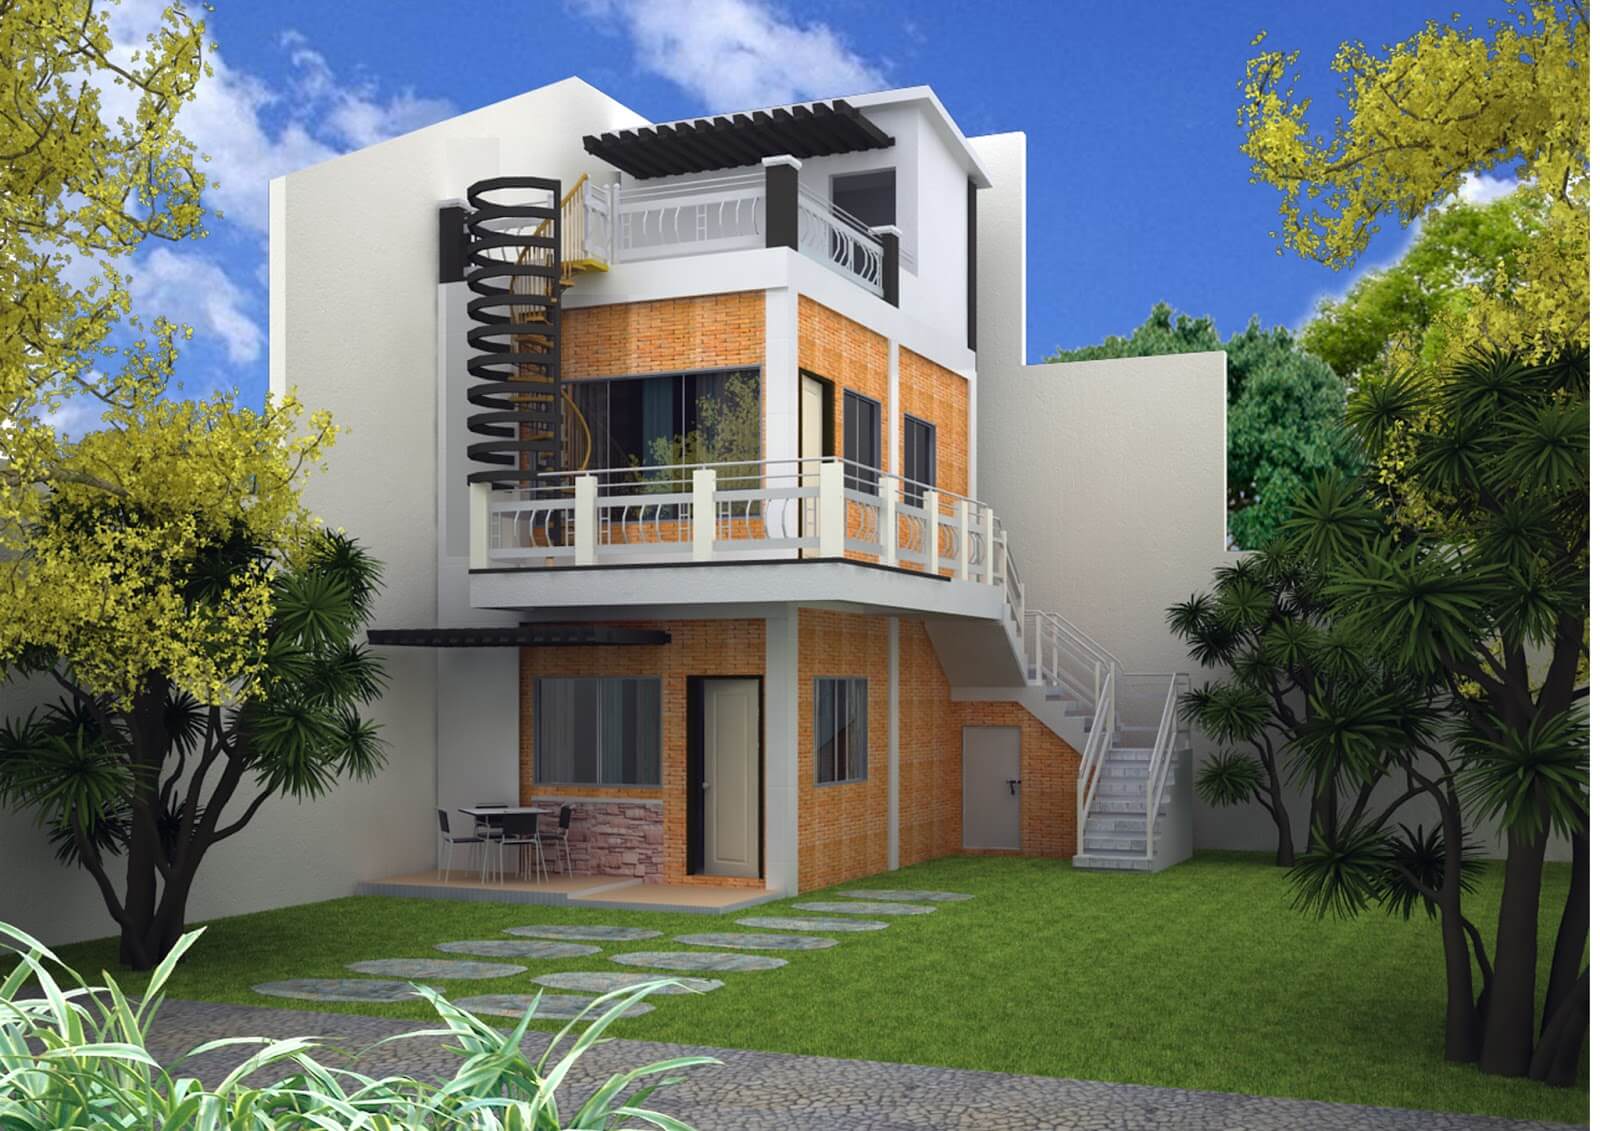 Mesmerizing 3 Storey House Designs With Rooftop - Live ...